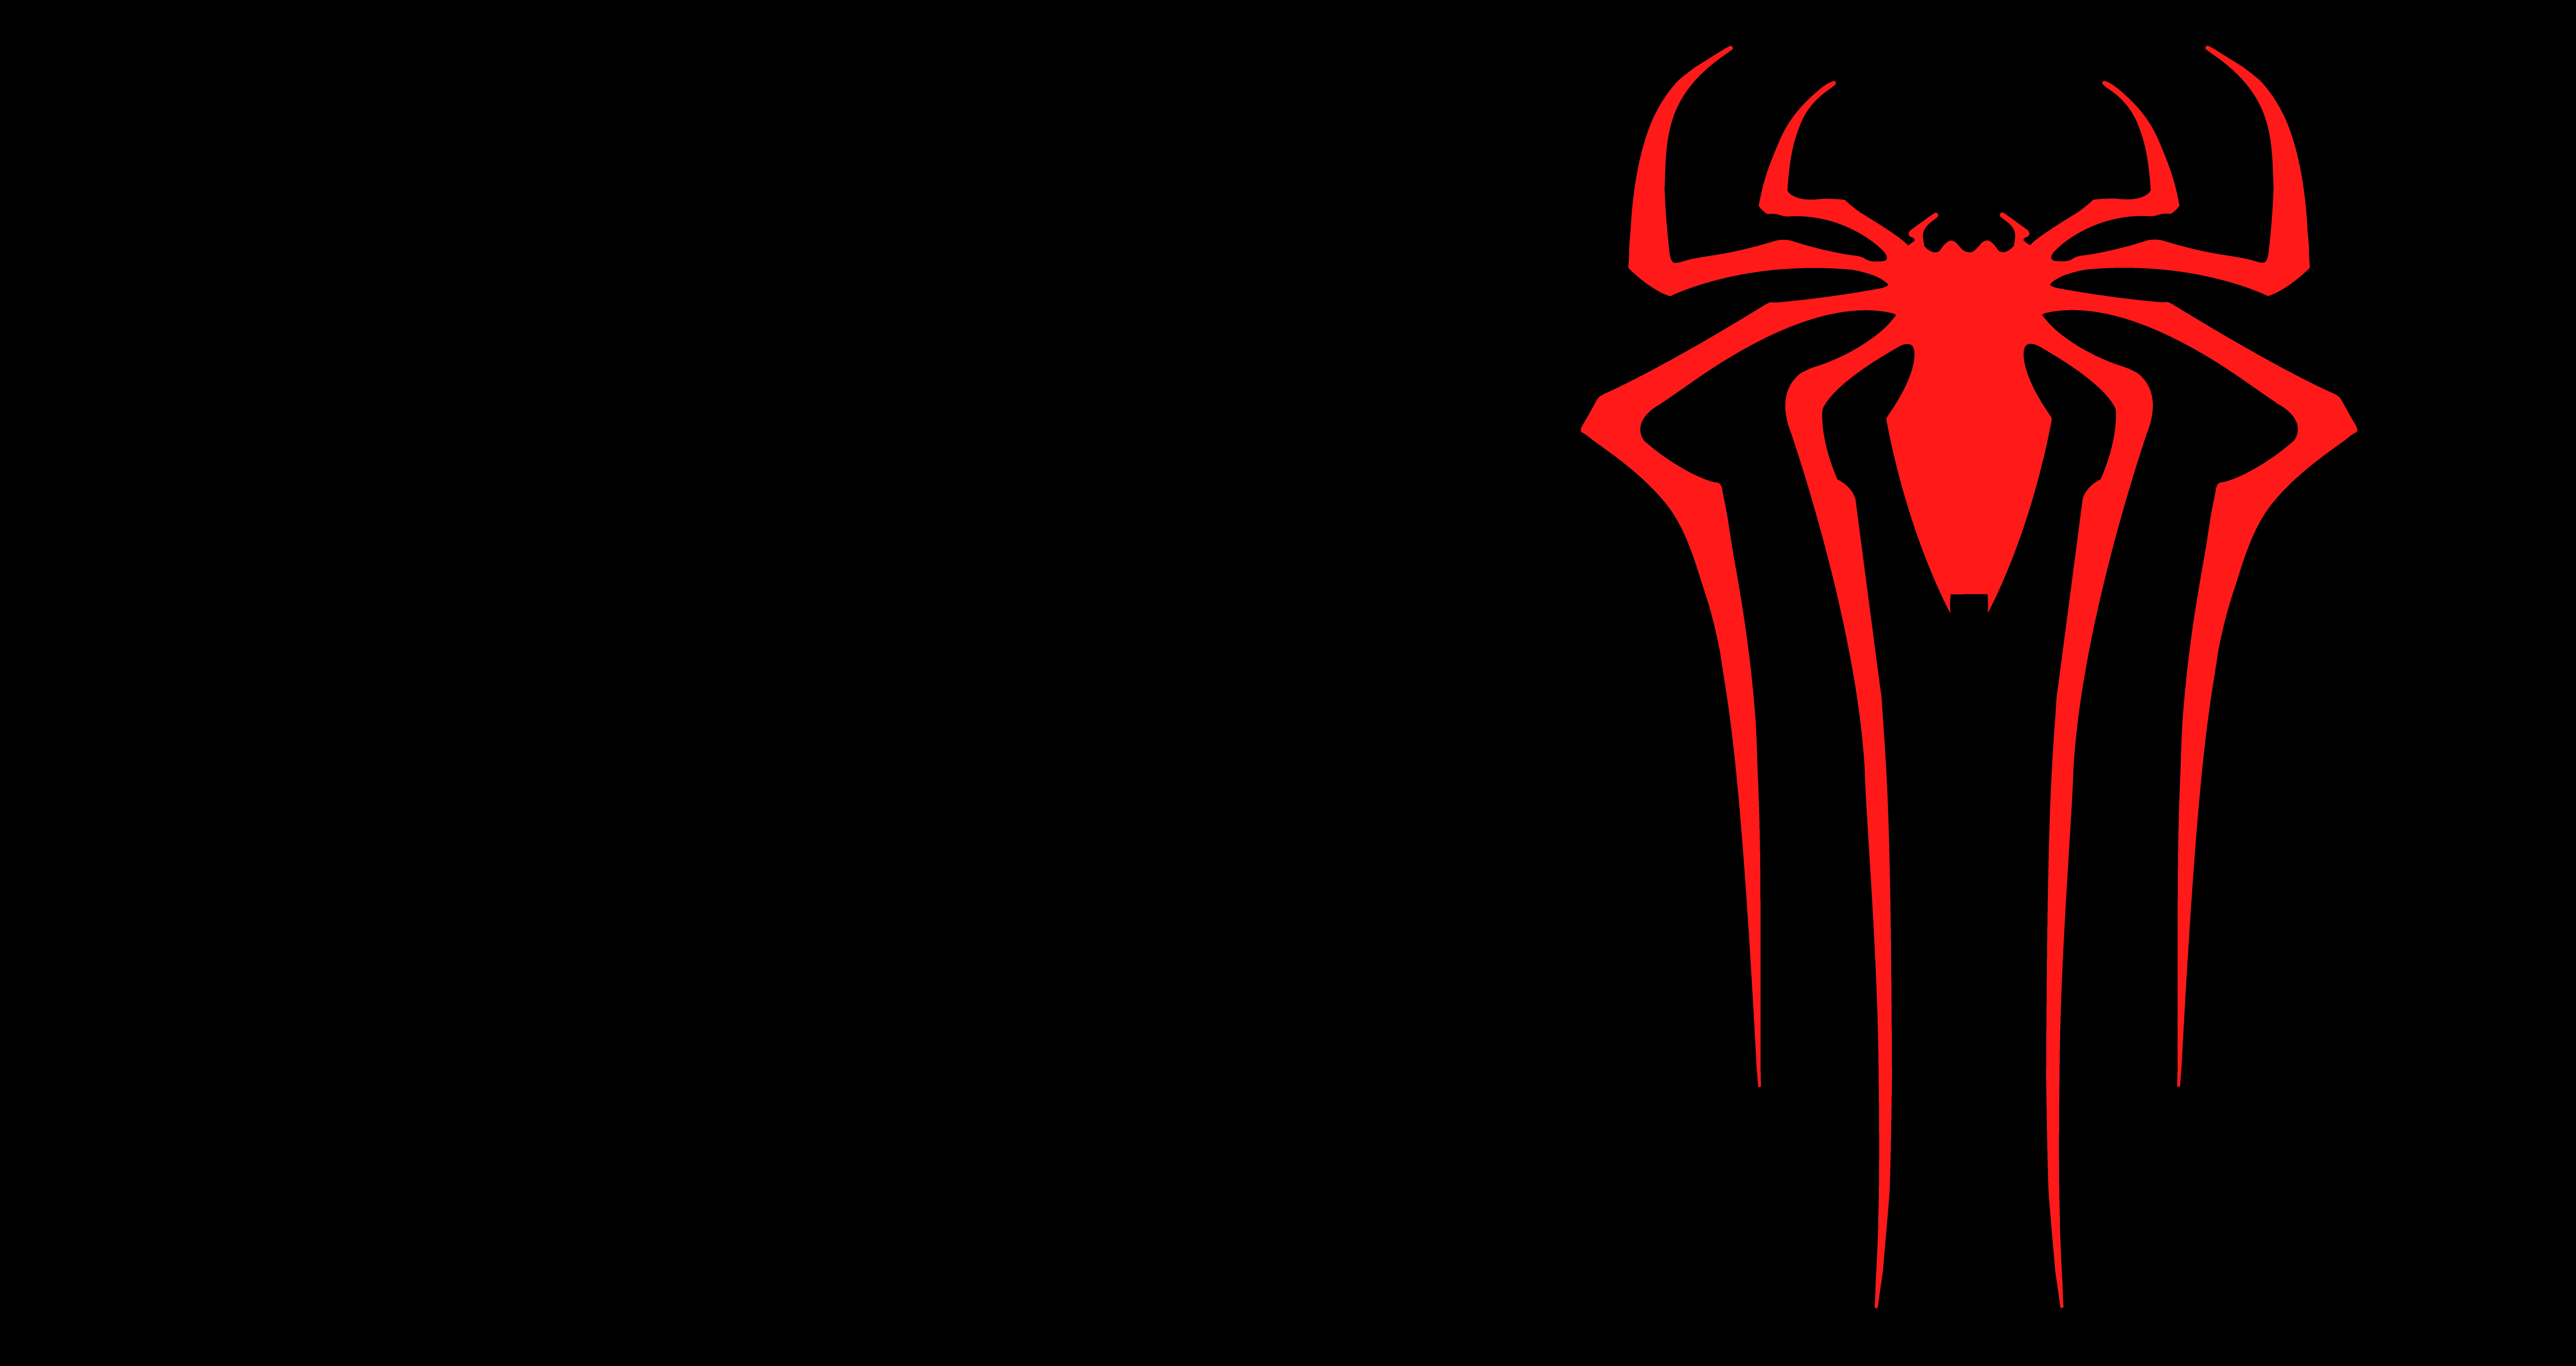 Spiderman Wallpaper Hd Collection (41+)